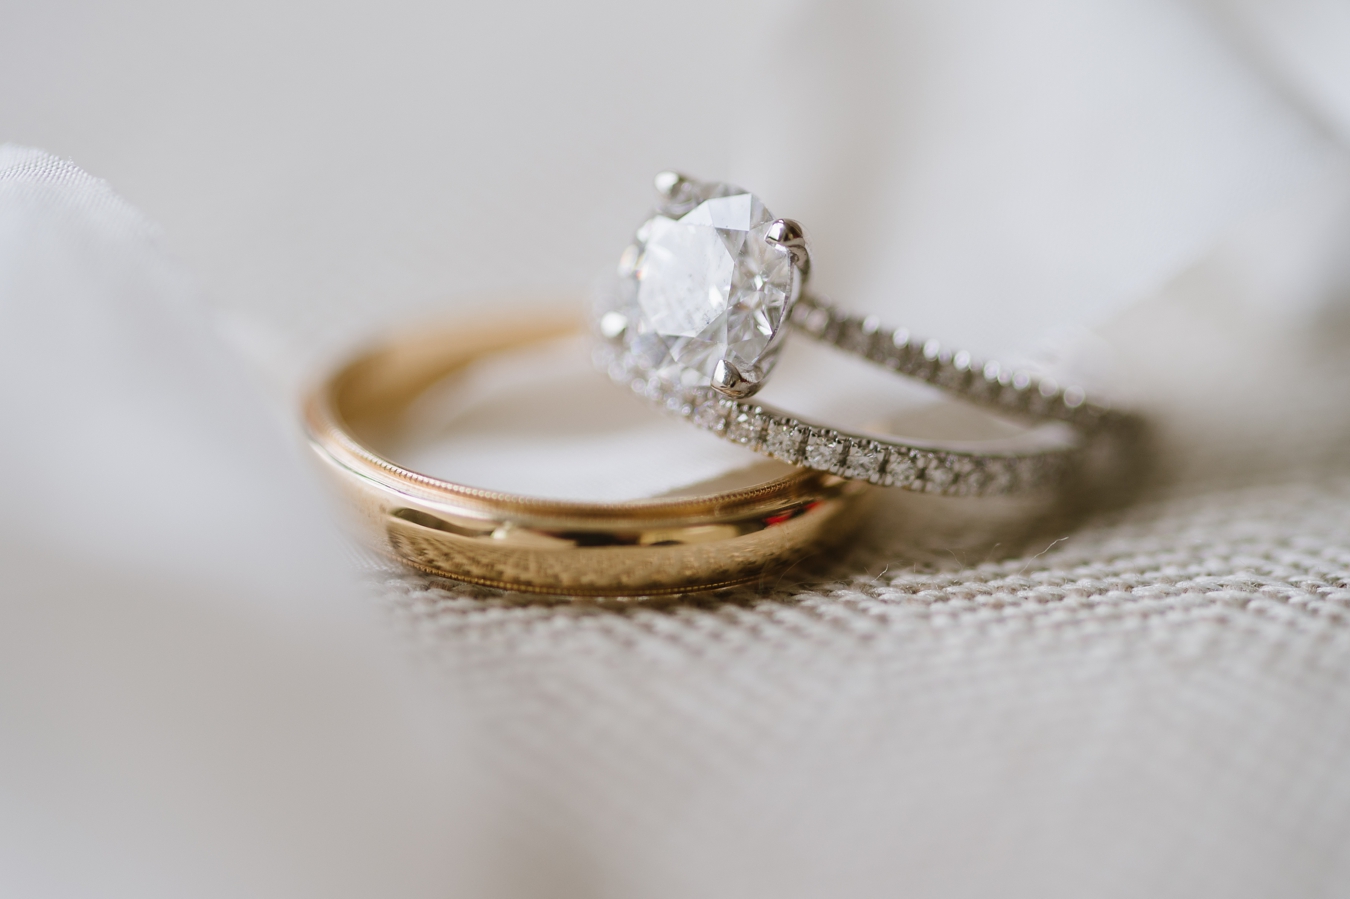 Solitaire Engagement Ring with Diamond Wedding Band in Annapolis, Maryland.